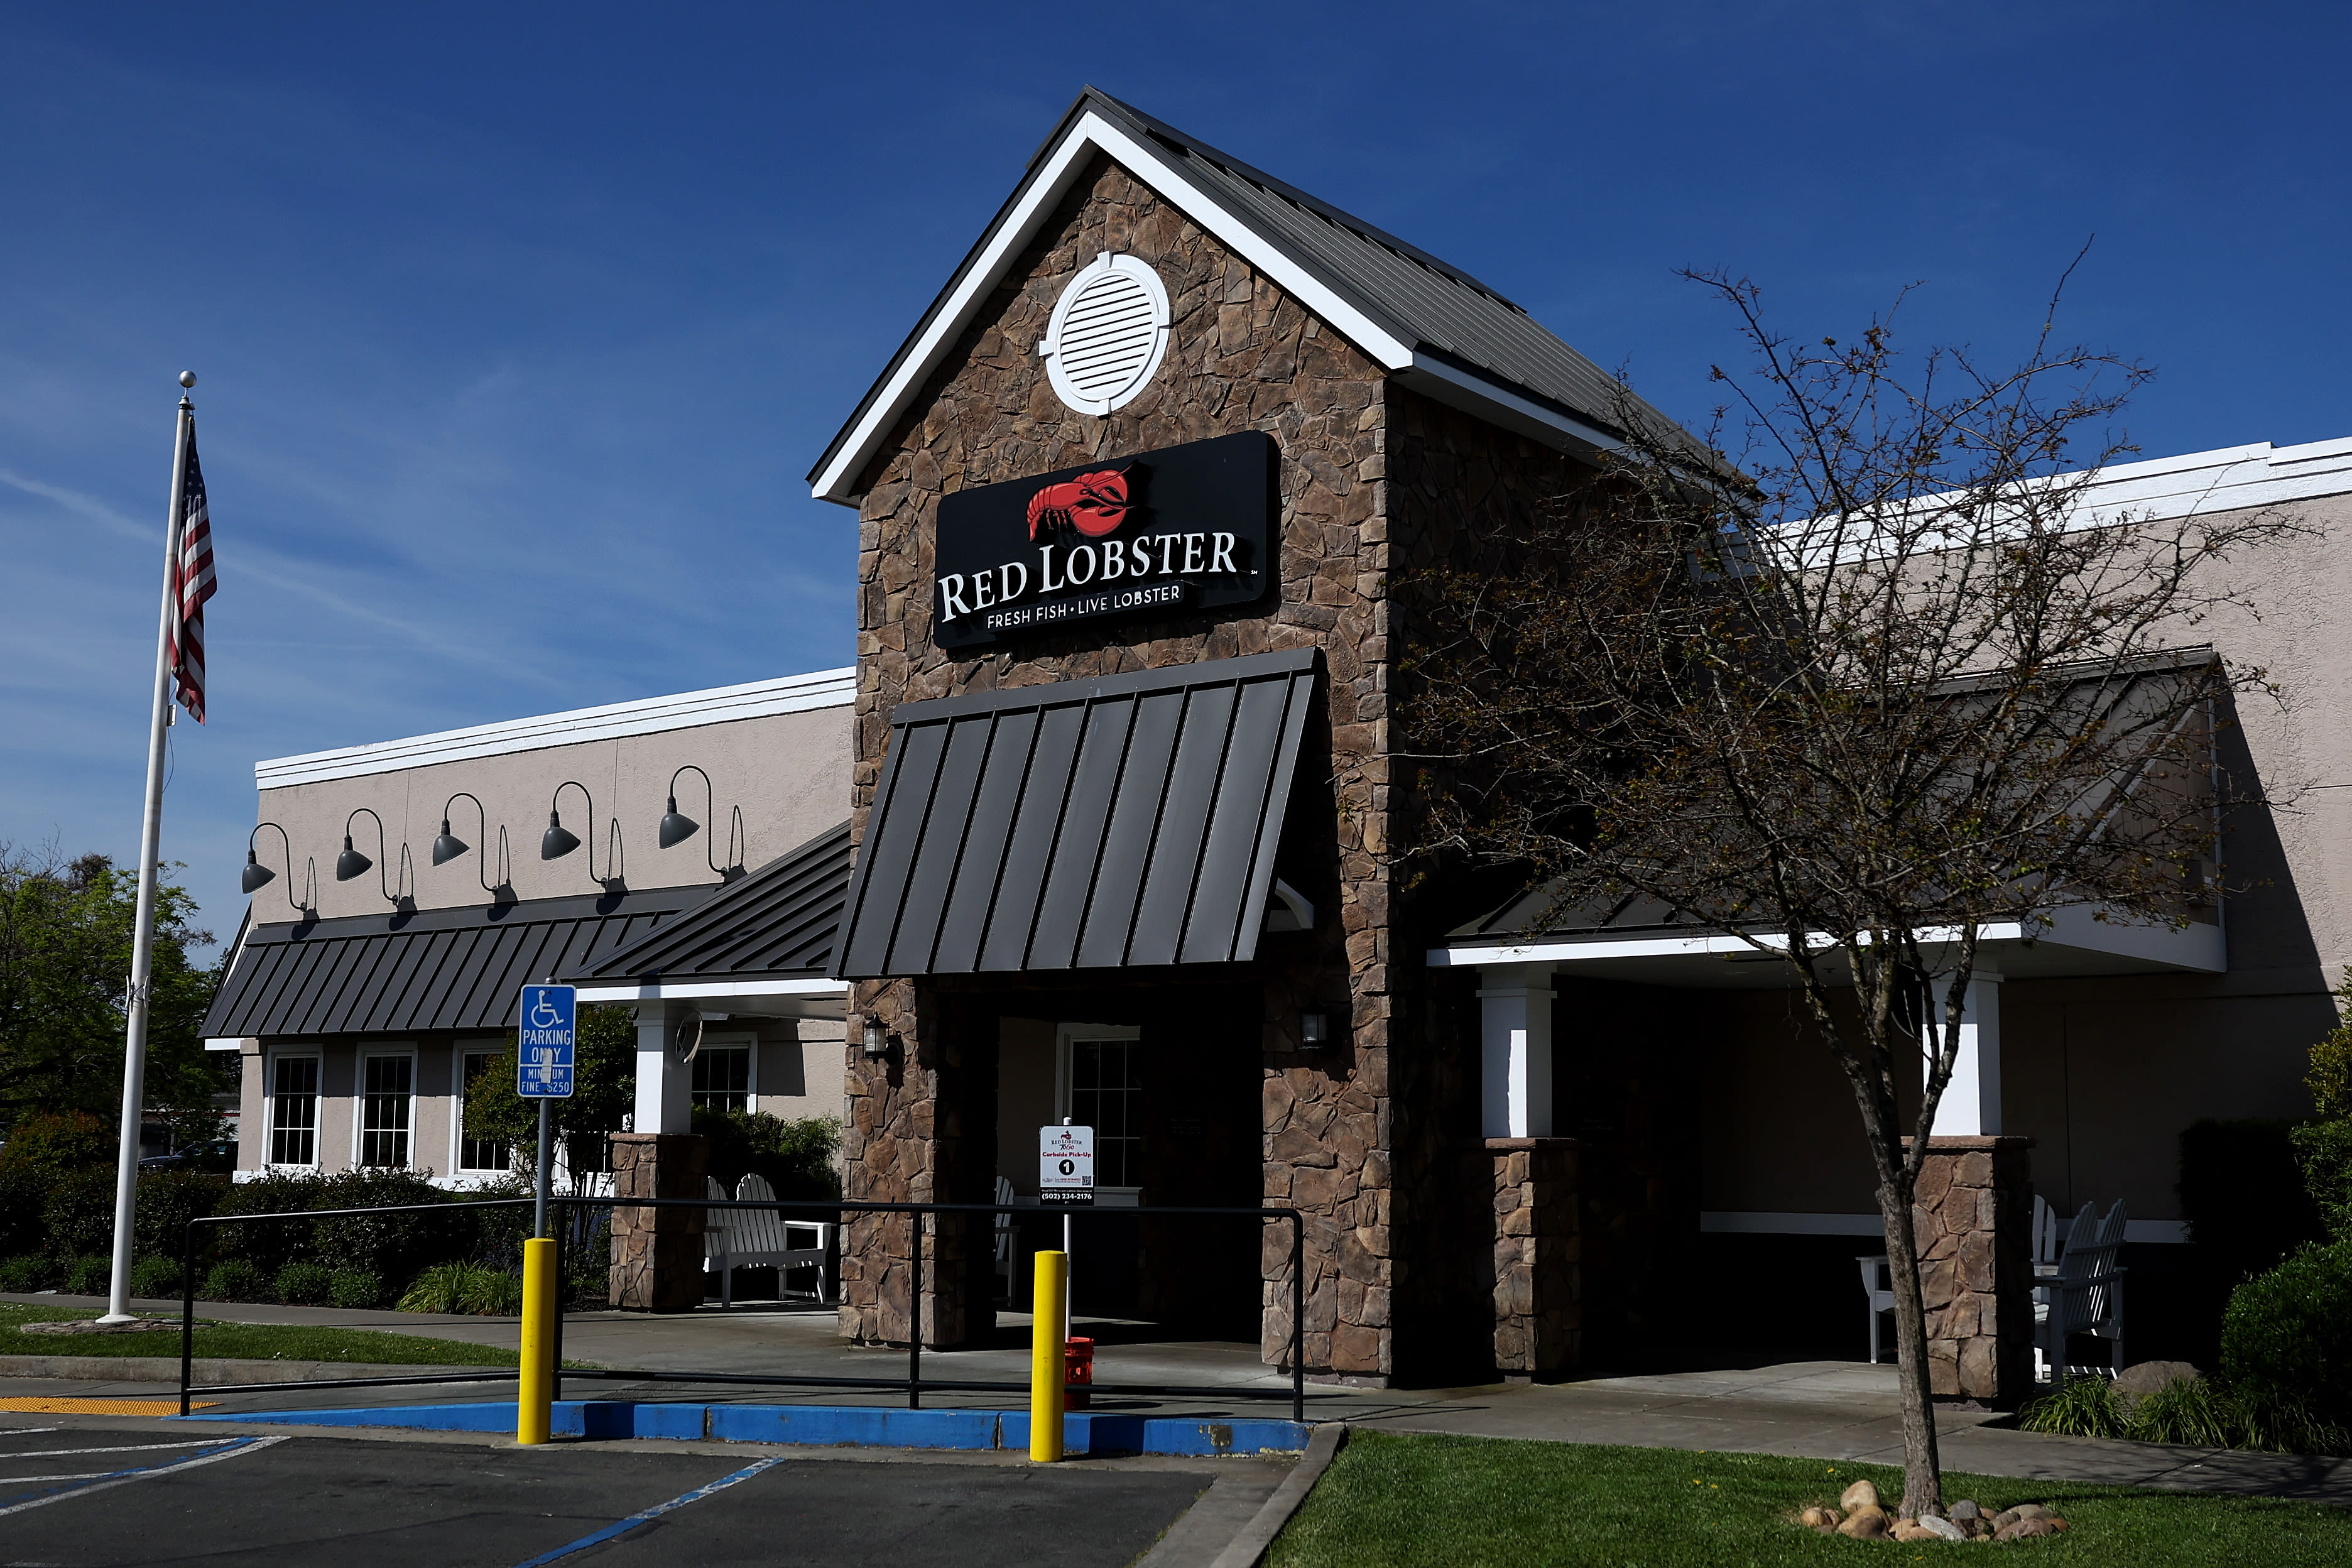 Red Lobster: What happens to my rewards, gift vouchers?